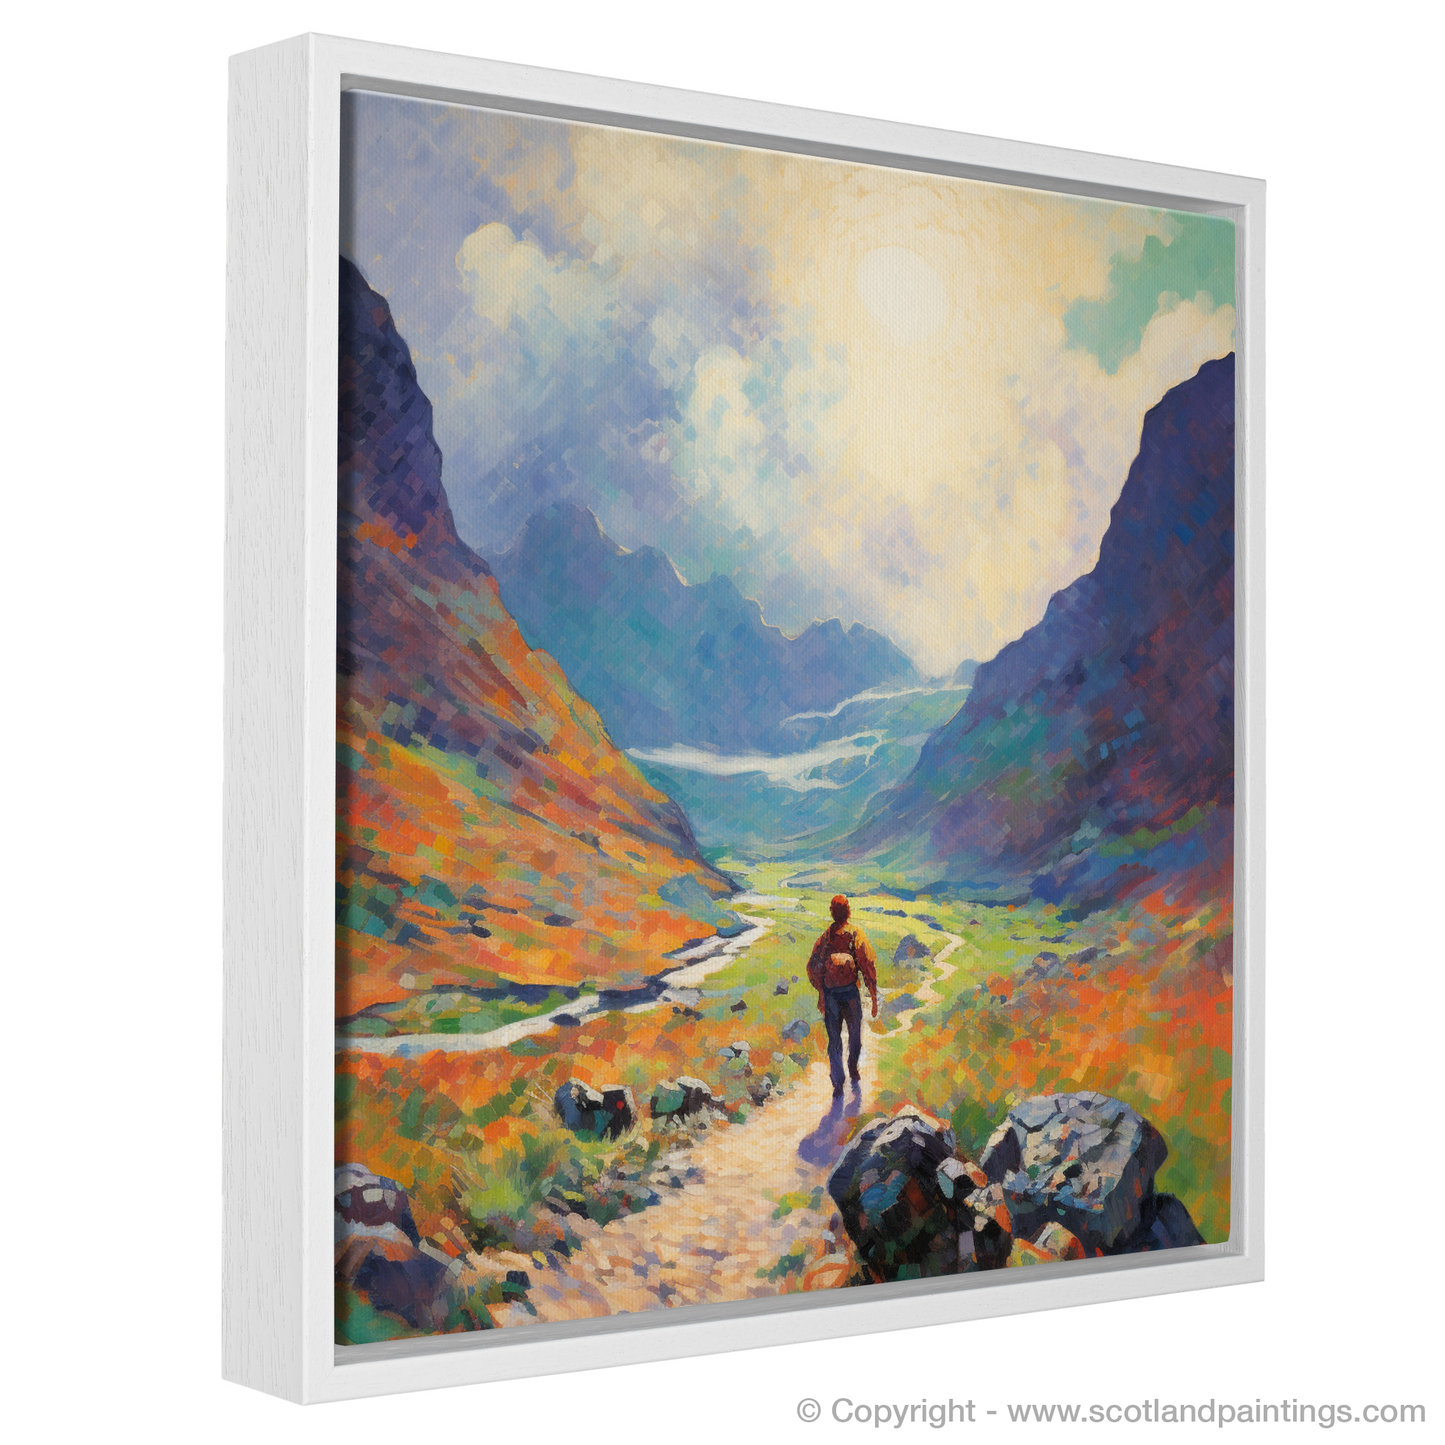 Painting and Art Print of Lone hiker in Glencoe during summer entitled "Summer Solitude in Glencoe Highlands".